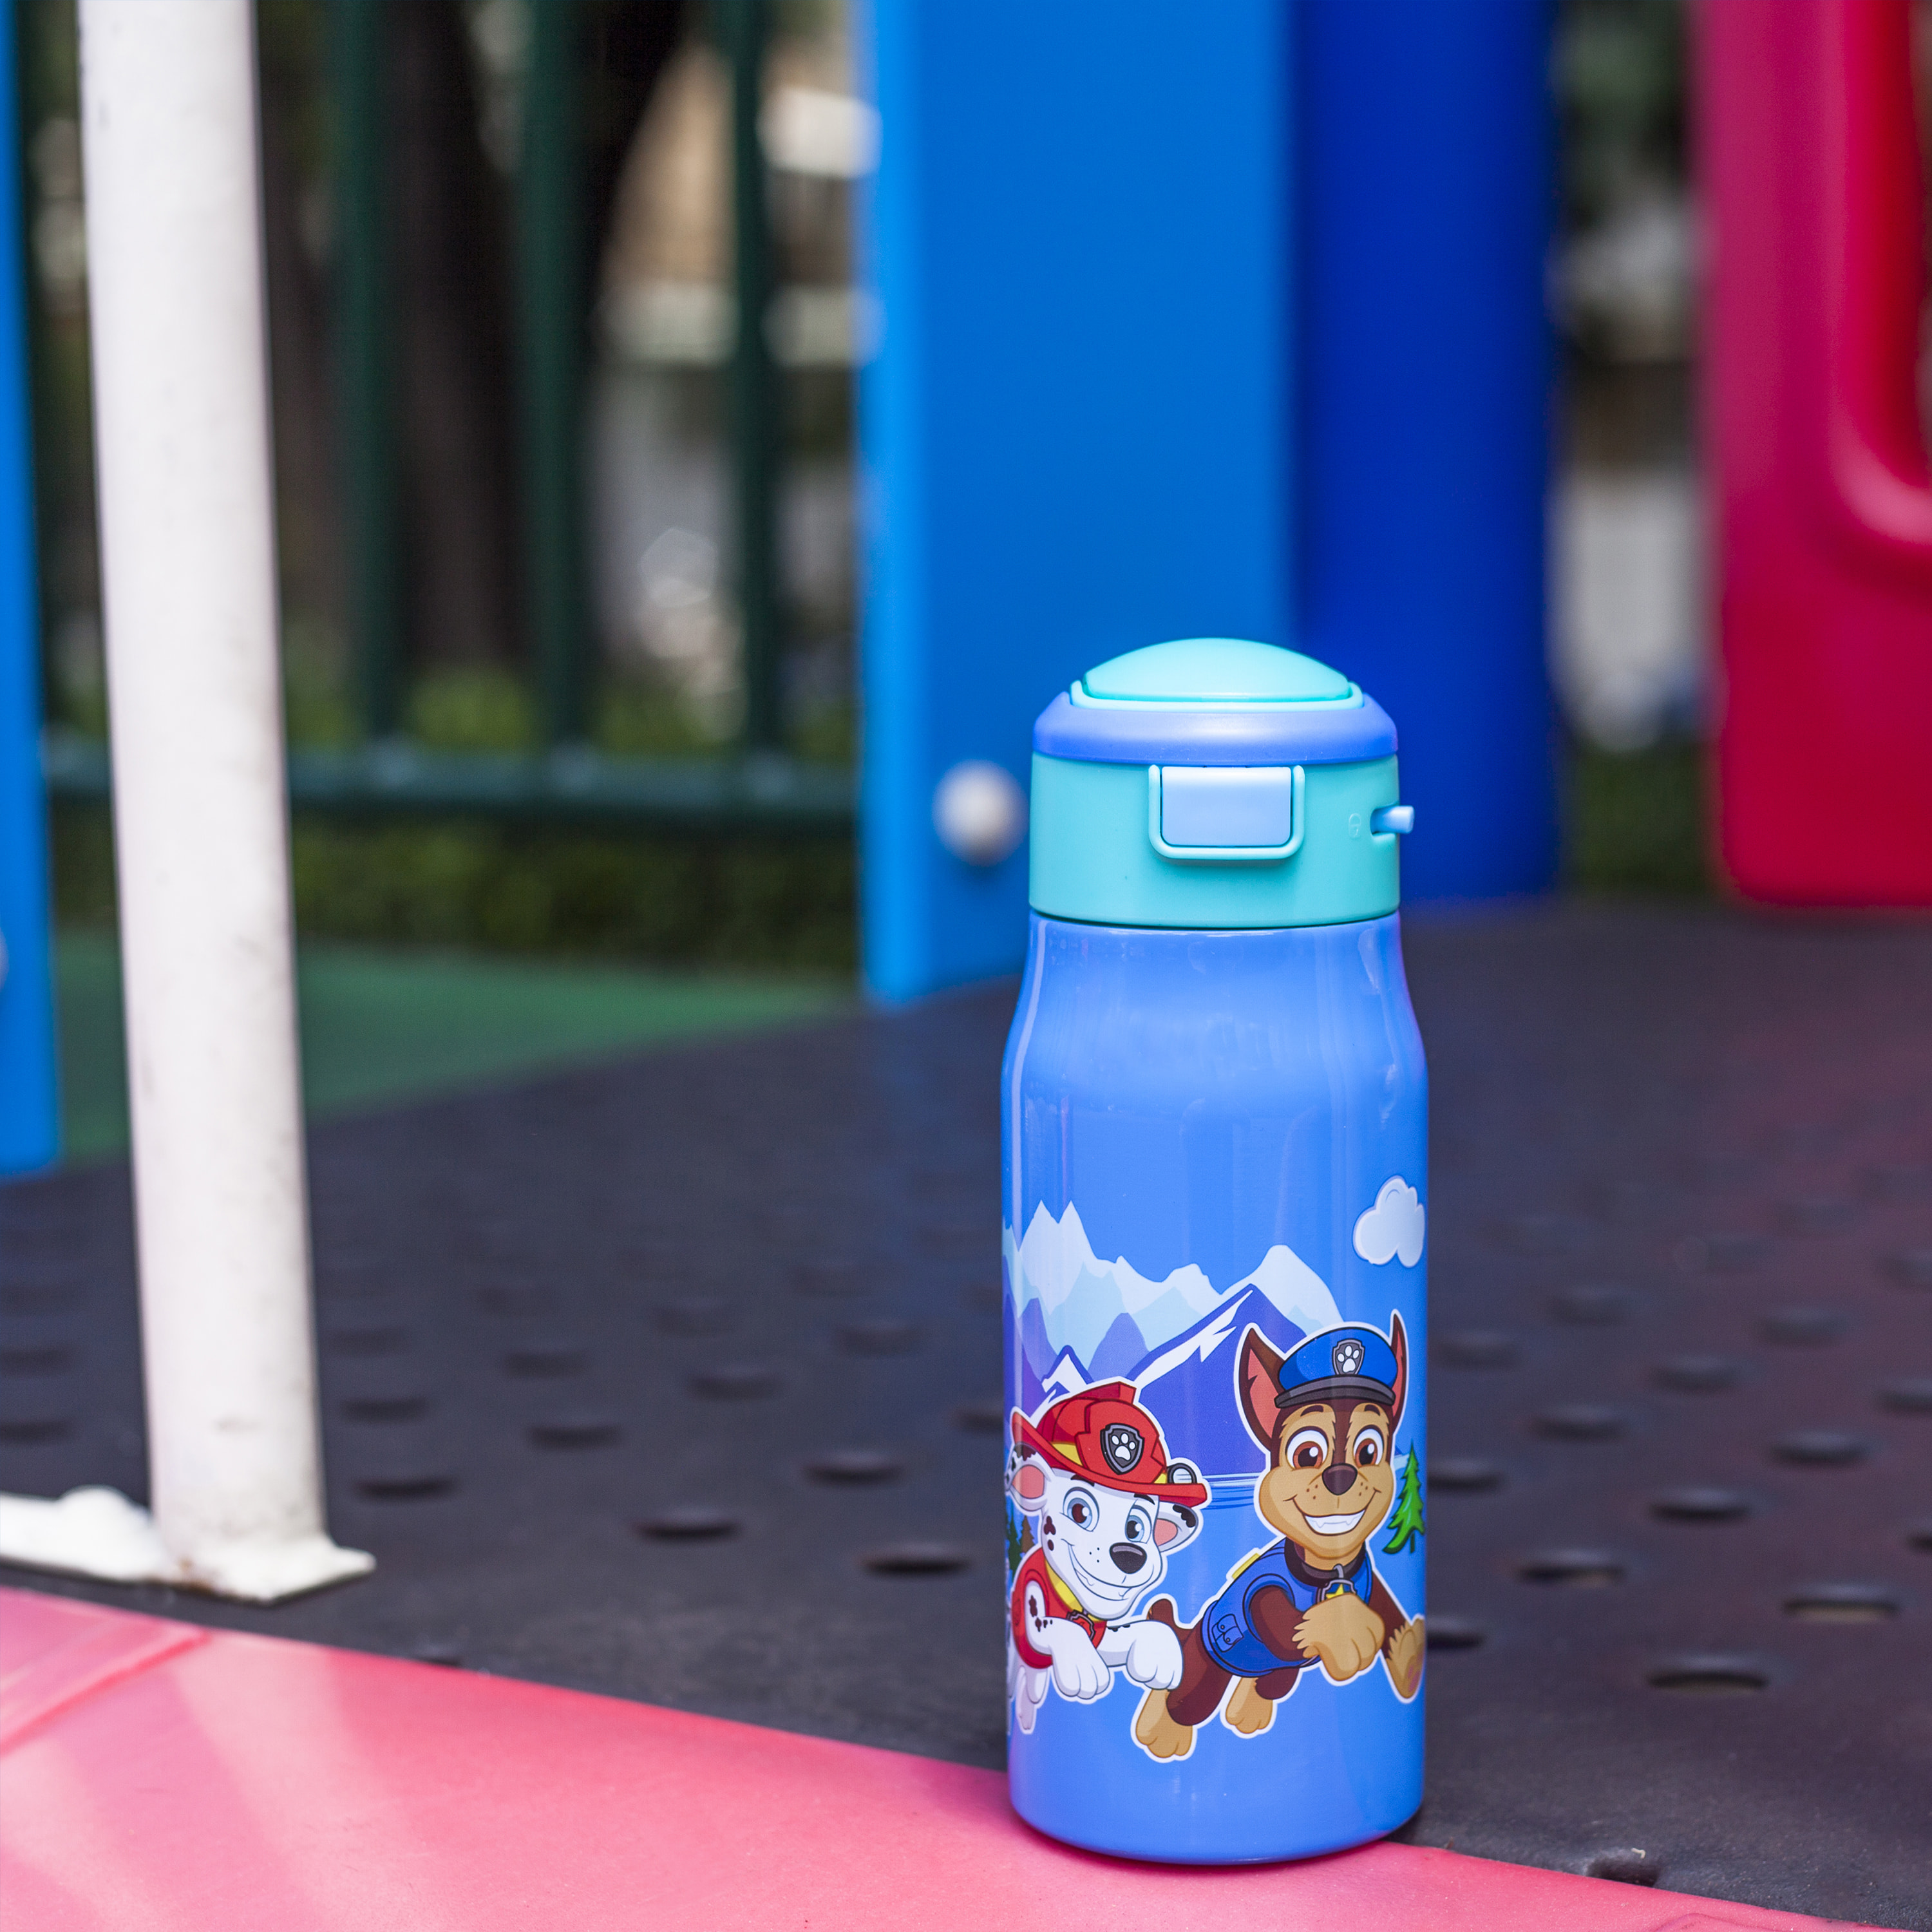 Paw Patrol 13.5 ounce Mesa Double Wall Insulated Stainless Steel Water Bottle, Chase and Marshall slideshow image 4